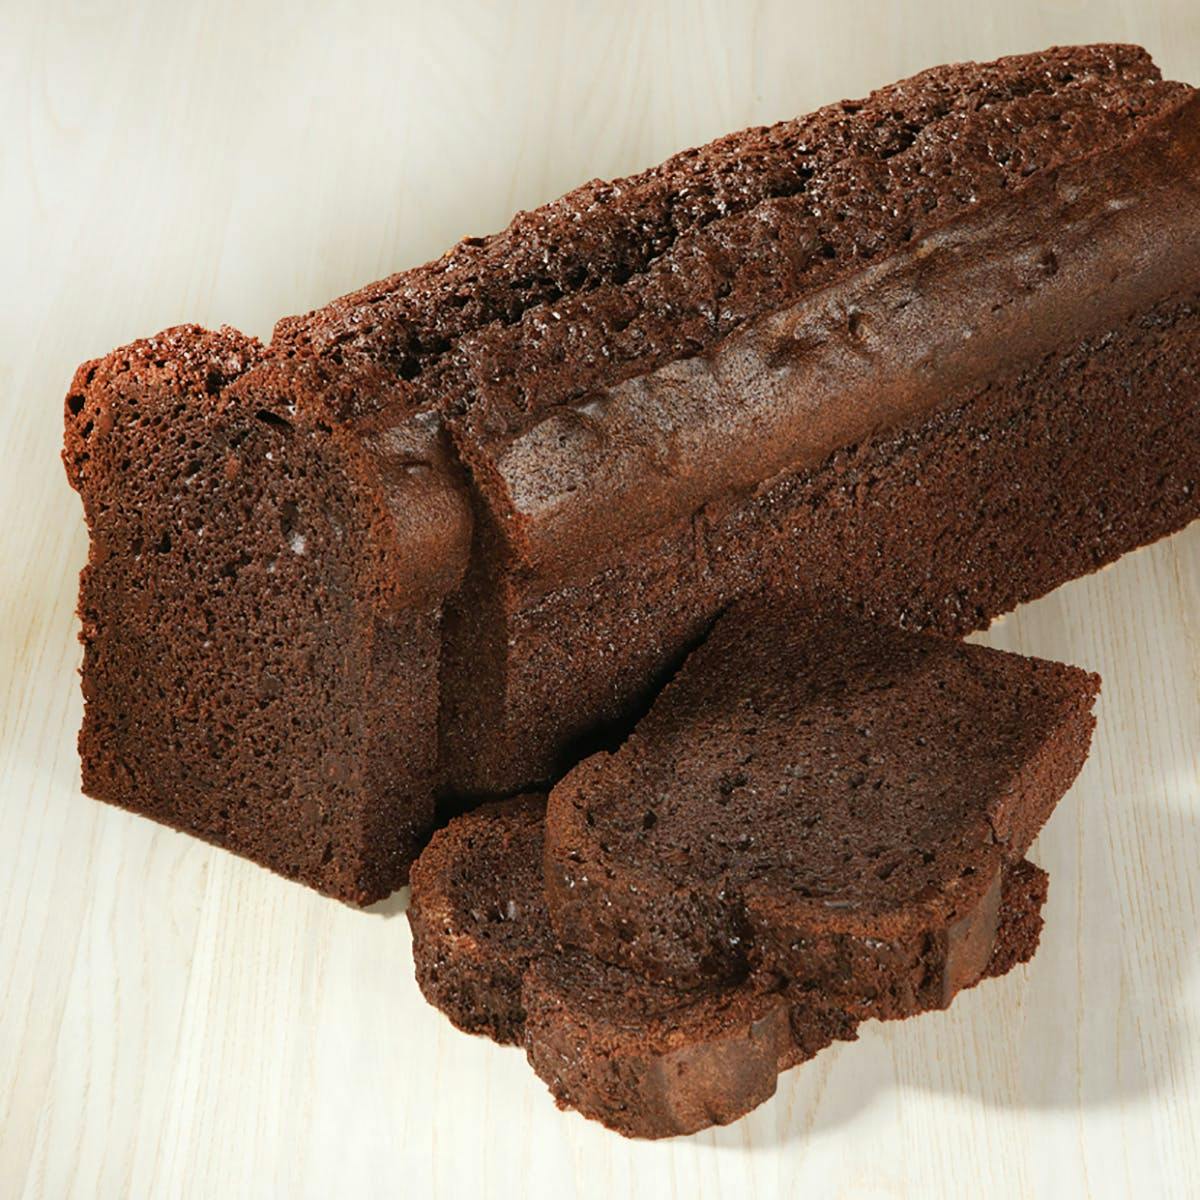 For a decadent Valentine's Day dessert, try this chocolate loaf cake